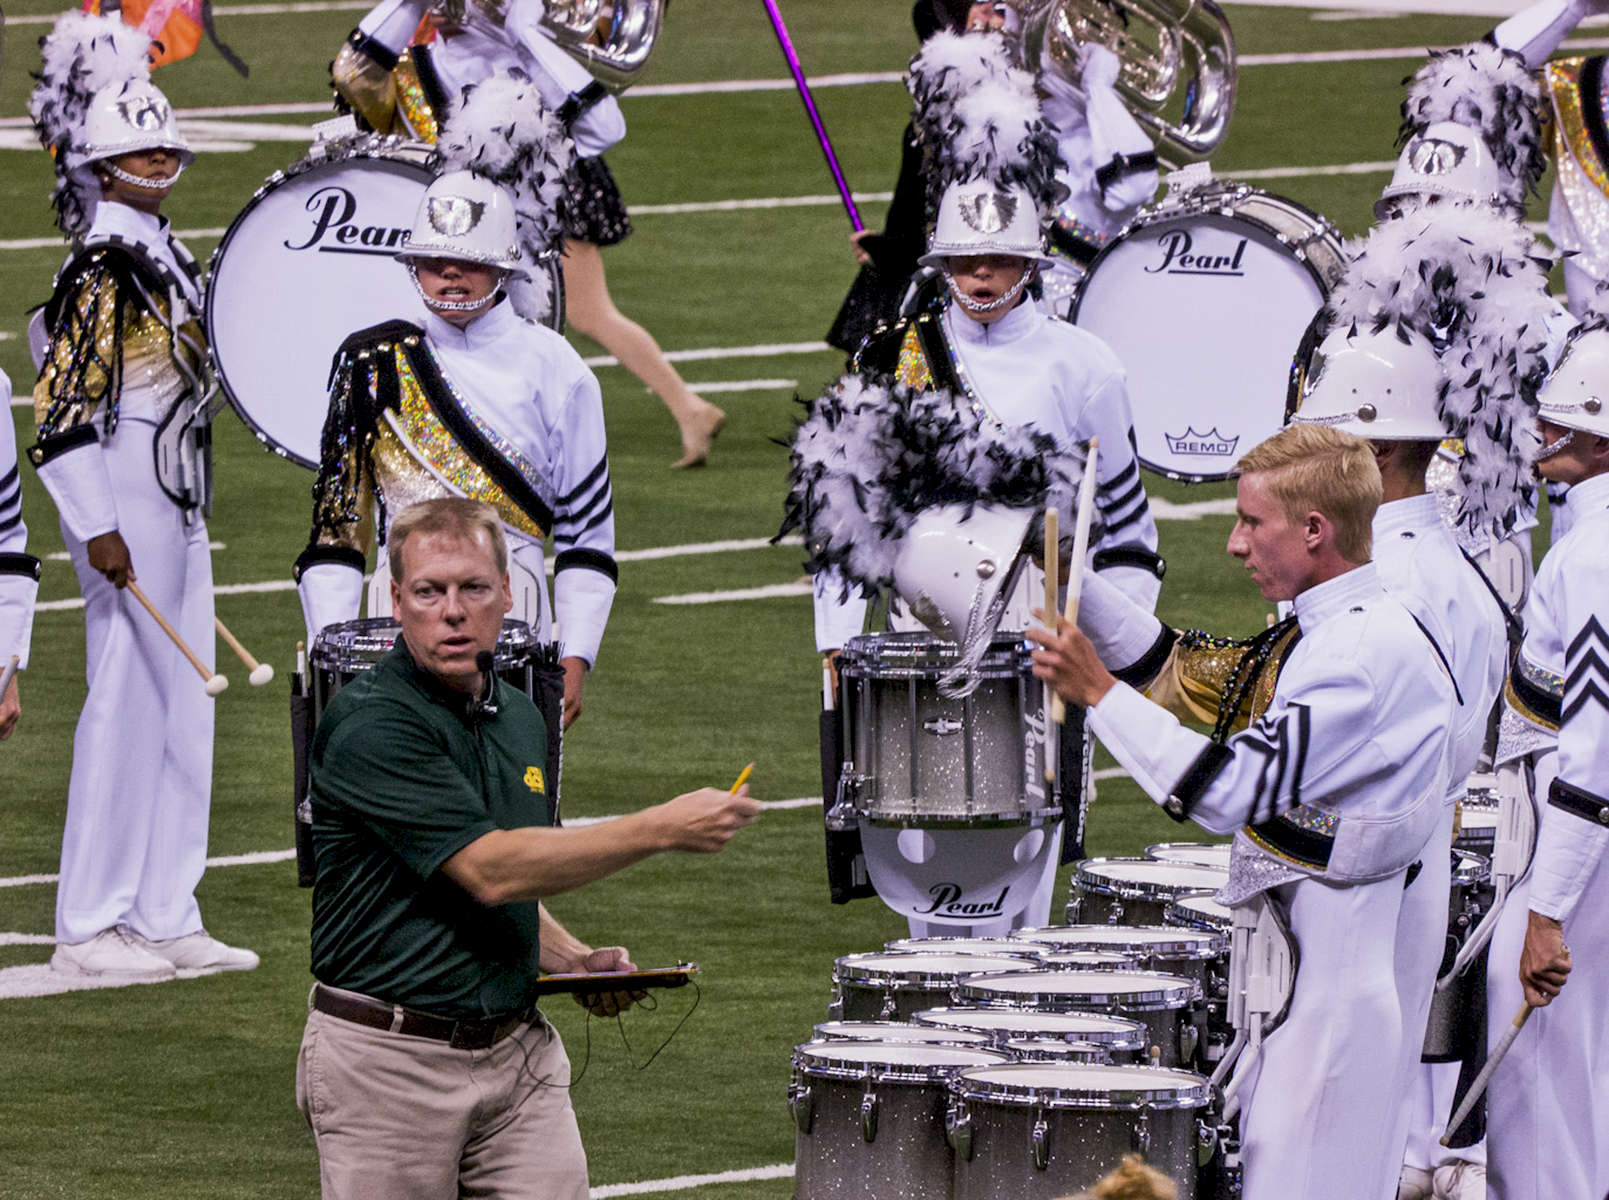 Drum Judge hands back the shanko of a drummer from Phantom Regiment at the 2015 DCI Finals at Lucs Oil Stadium. Photo by ronwyattphotos.com